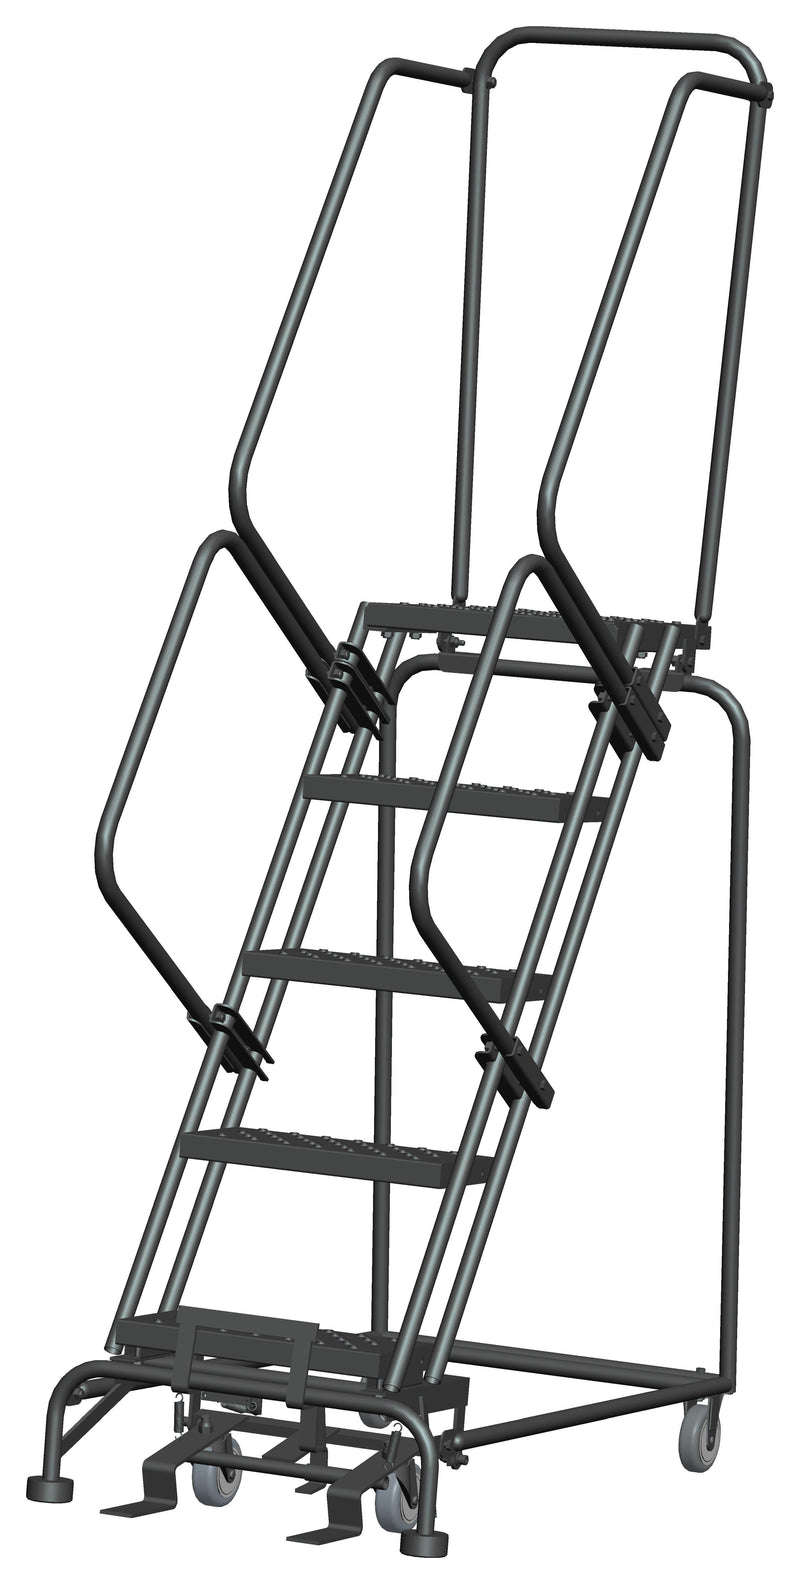 Rolling Ladder - M-2000 Series - 5 Step, Handrails - Ballymore